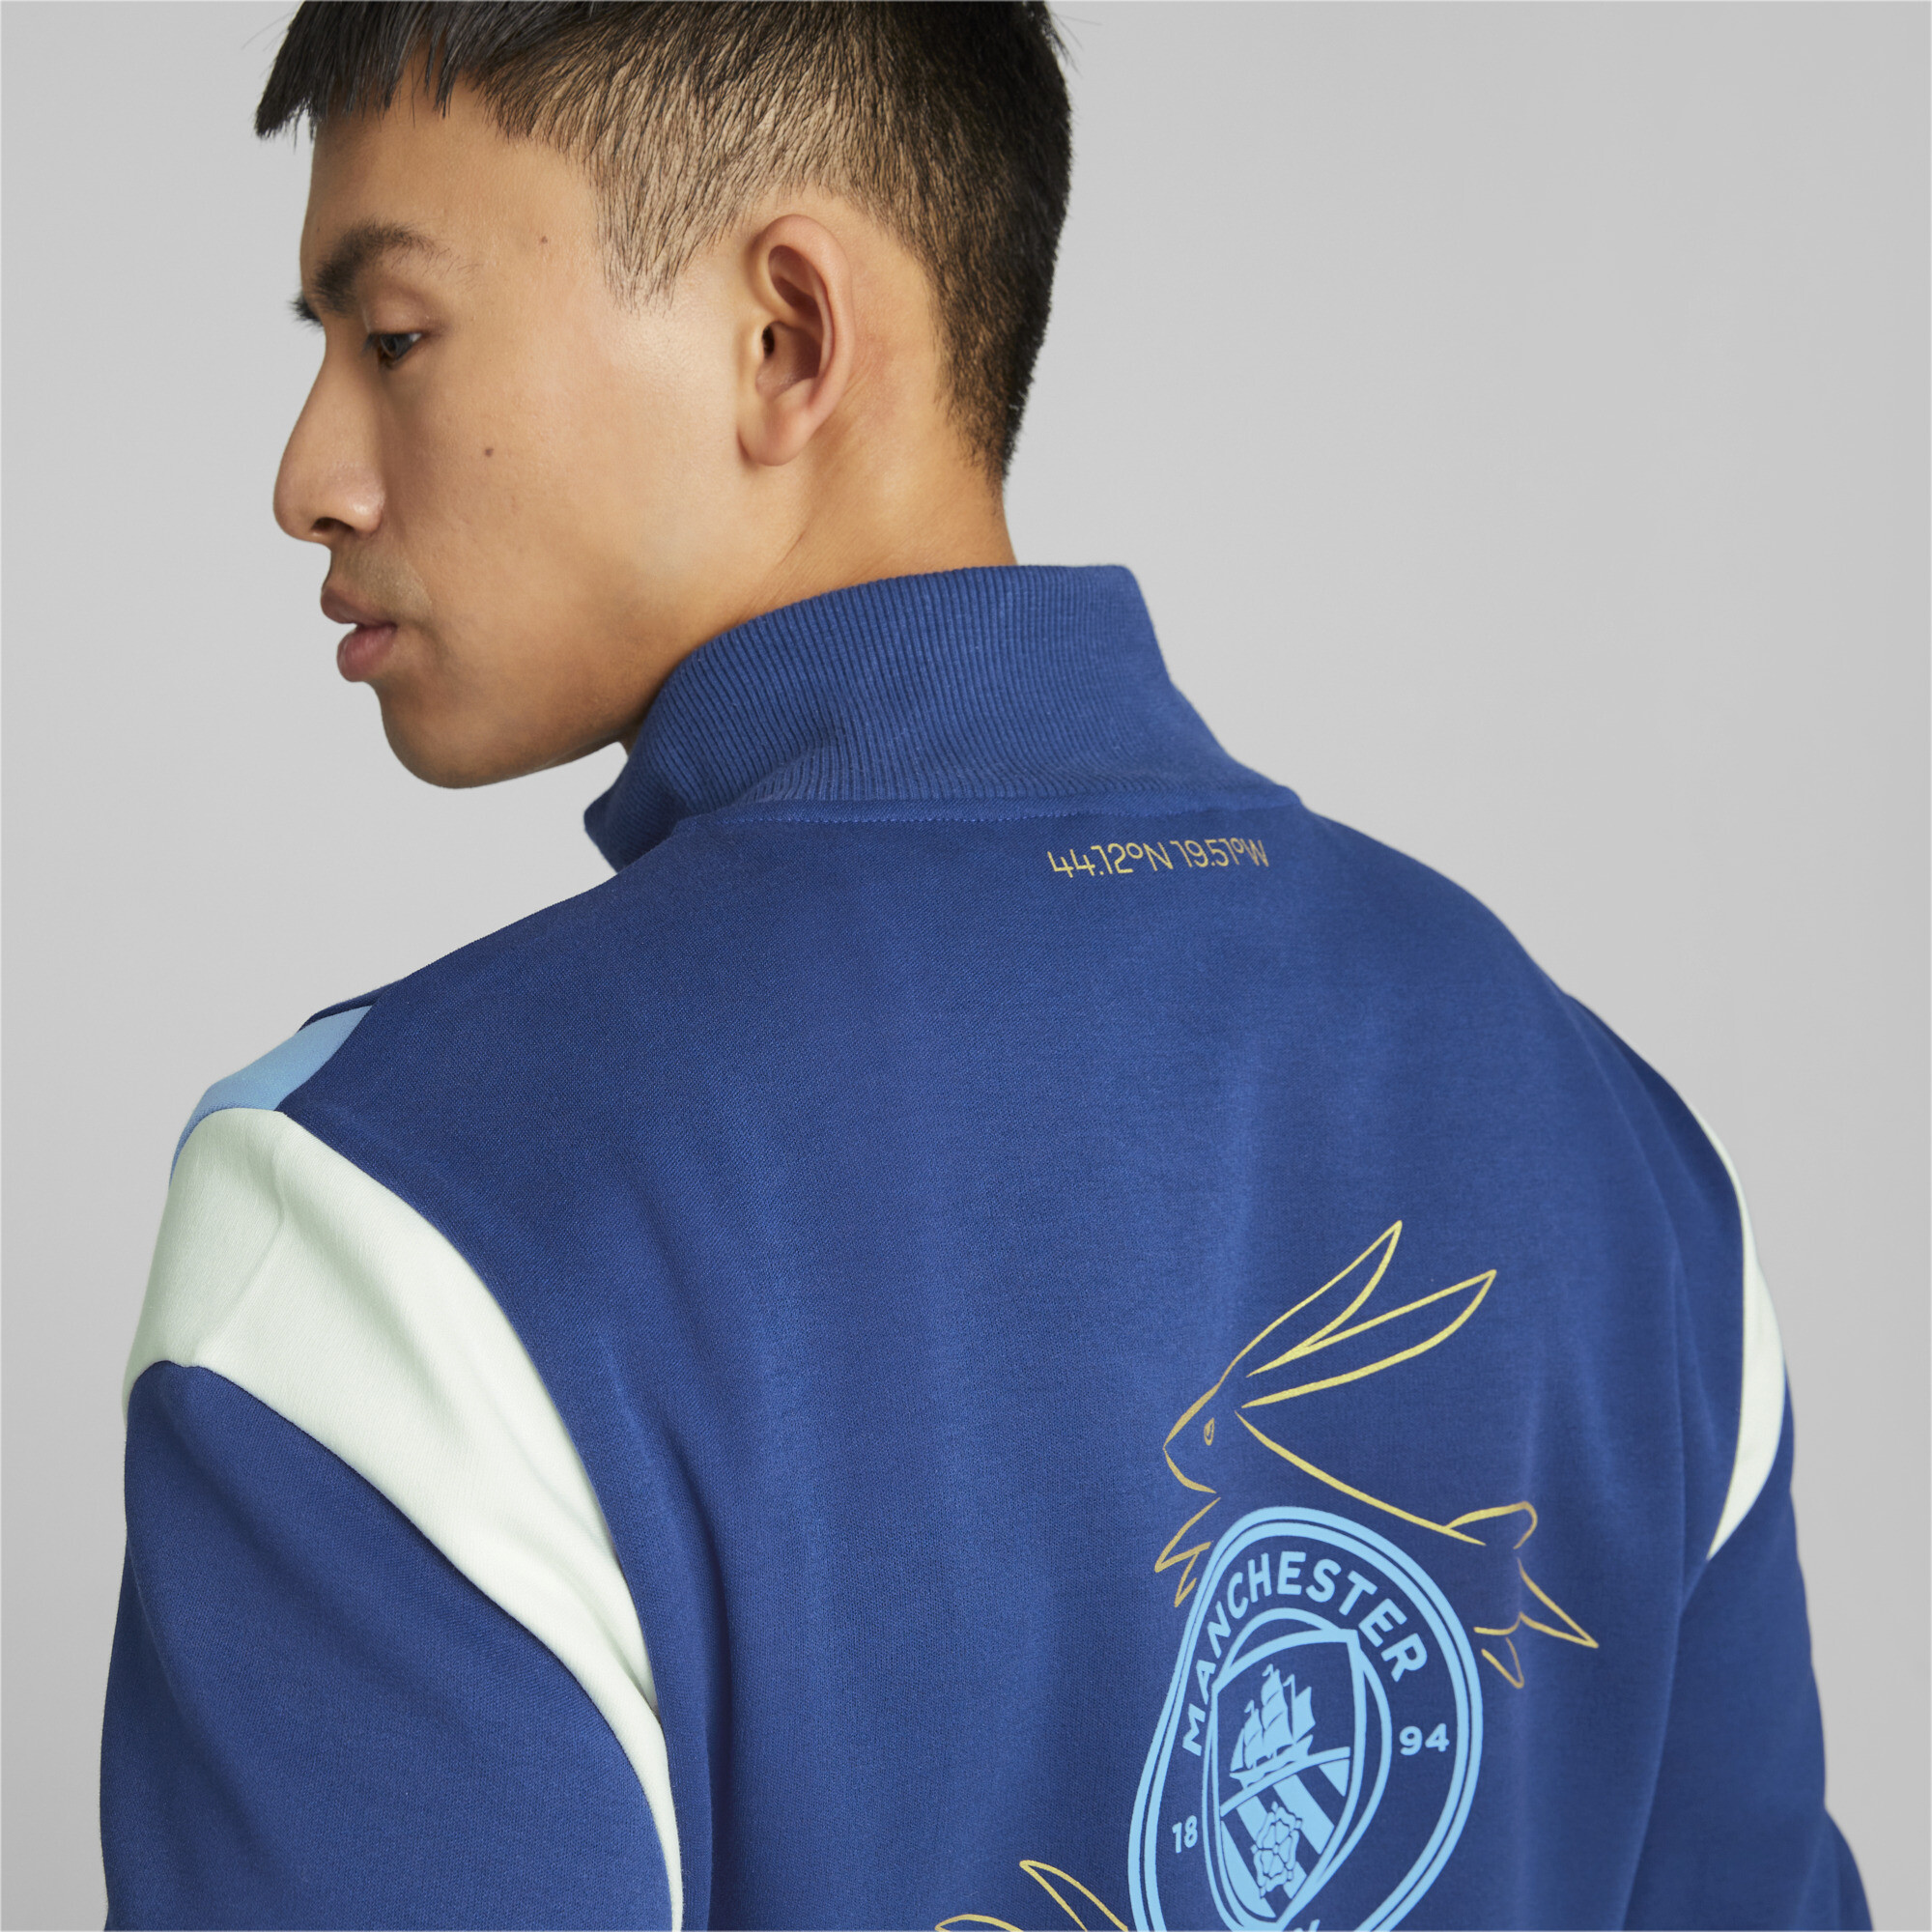 Men's PUMA Manchester City Chinese New Year Track Jacket In Blue, Size 2XL